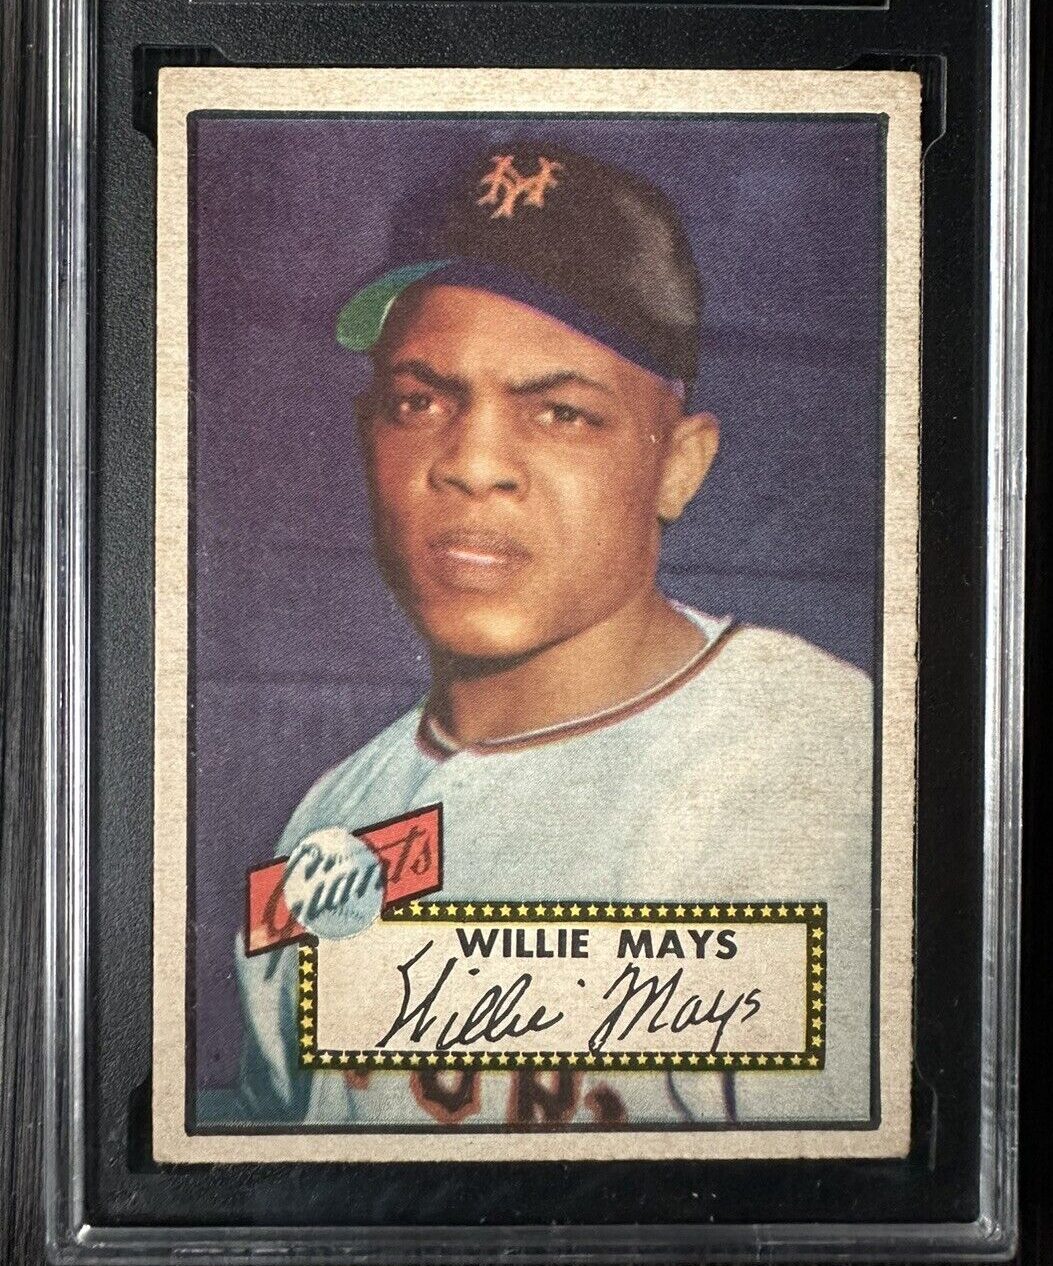 1952 Topps Willie Mays